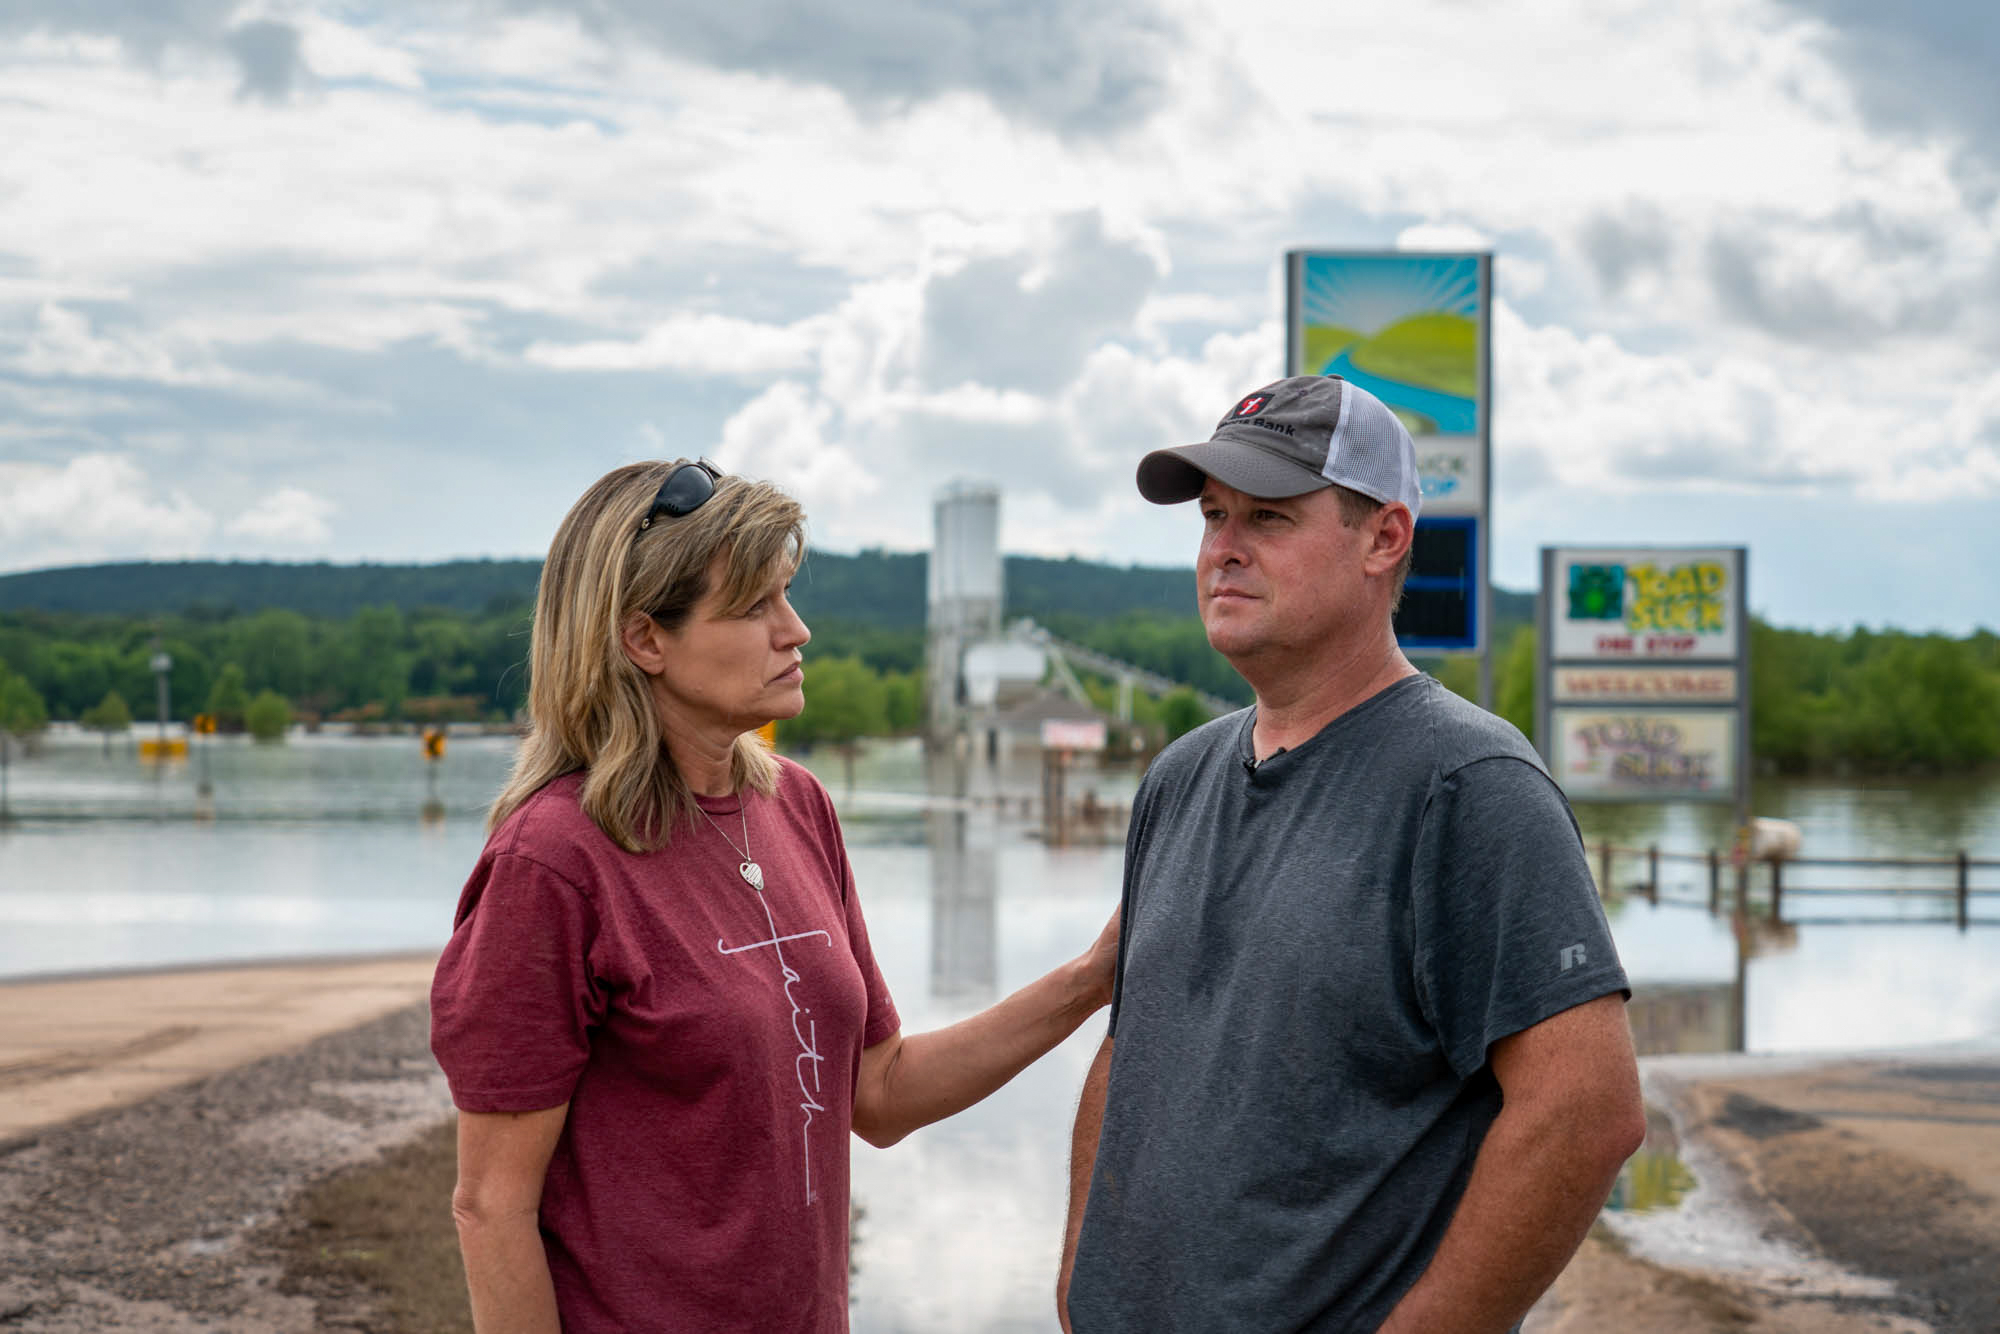 Jason and Christy Trantina - Jason and Christy Trantina own and operate the Toad Suck One-Stop, the only store in Toad Suck, Arkansas, population 288. Jason and his employees tried to hold back the flood waters from the Arkansas River with a barrier of concrete blocks, like the Trantinas have done before. “But this flood was different,” Christy said. “It was river-rushing current water, and so the current washed away some of the barrier and water got inside and it was able to get inside our store.” (Jordan Laird/News21)